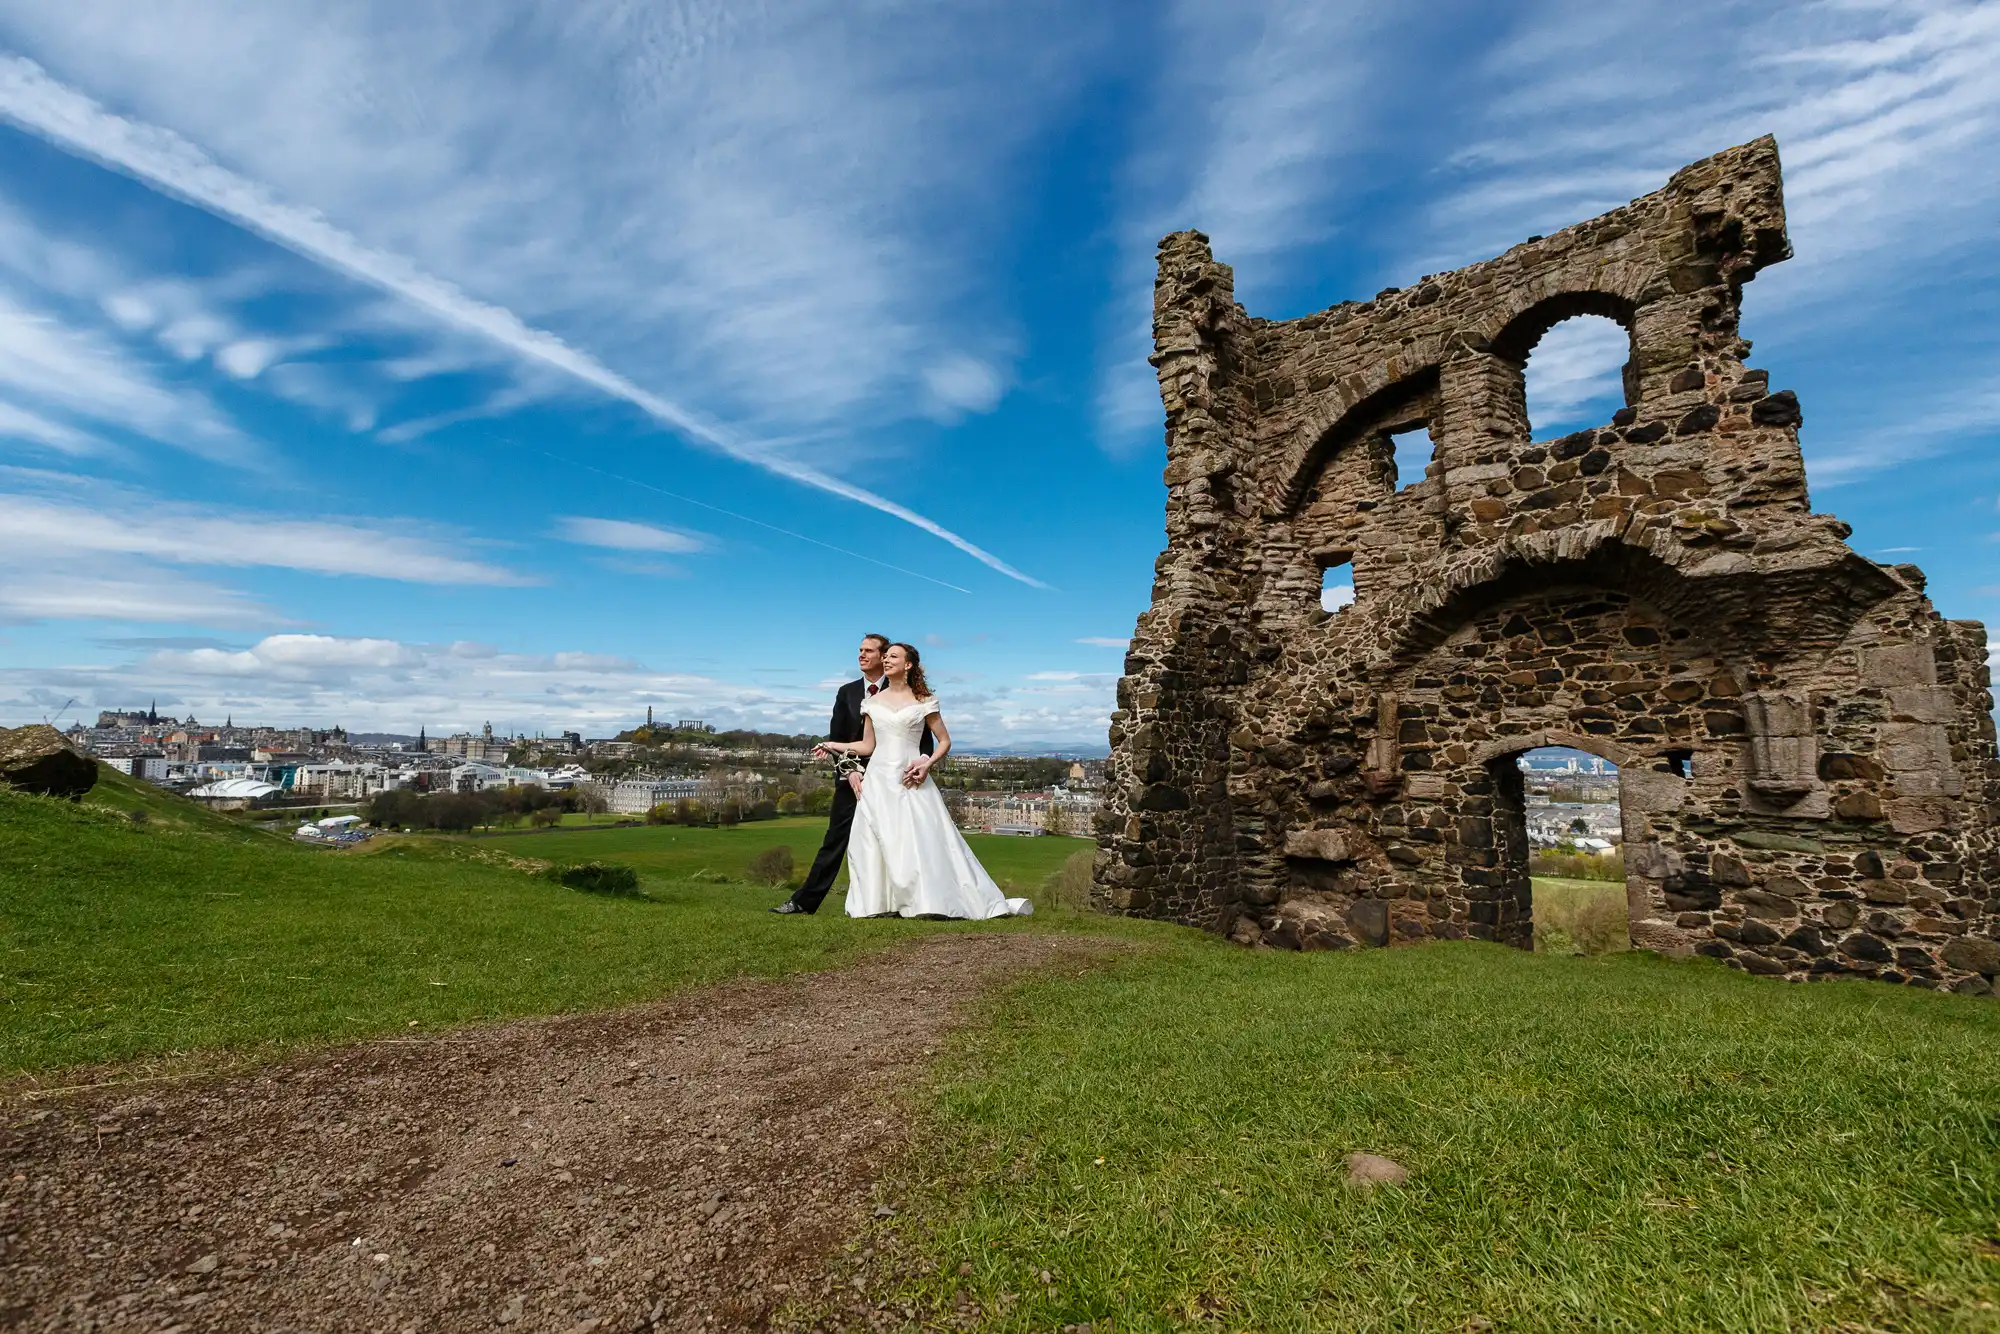 A bride and groom walking hand in hand near the ruins of an old stone structure, with a cityscape under a blue sky in the background.